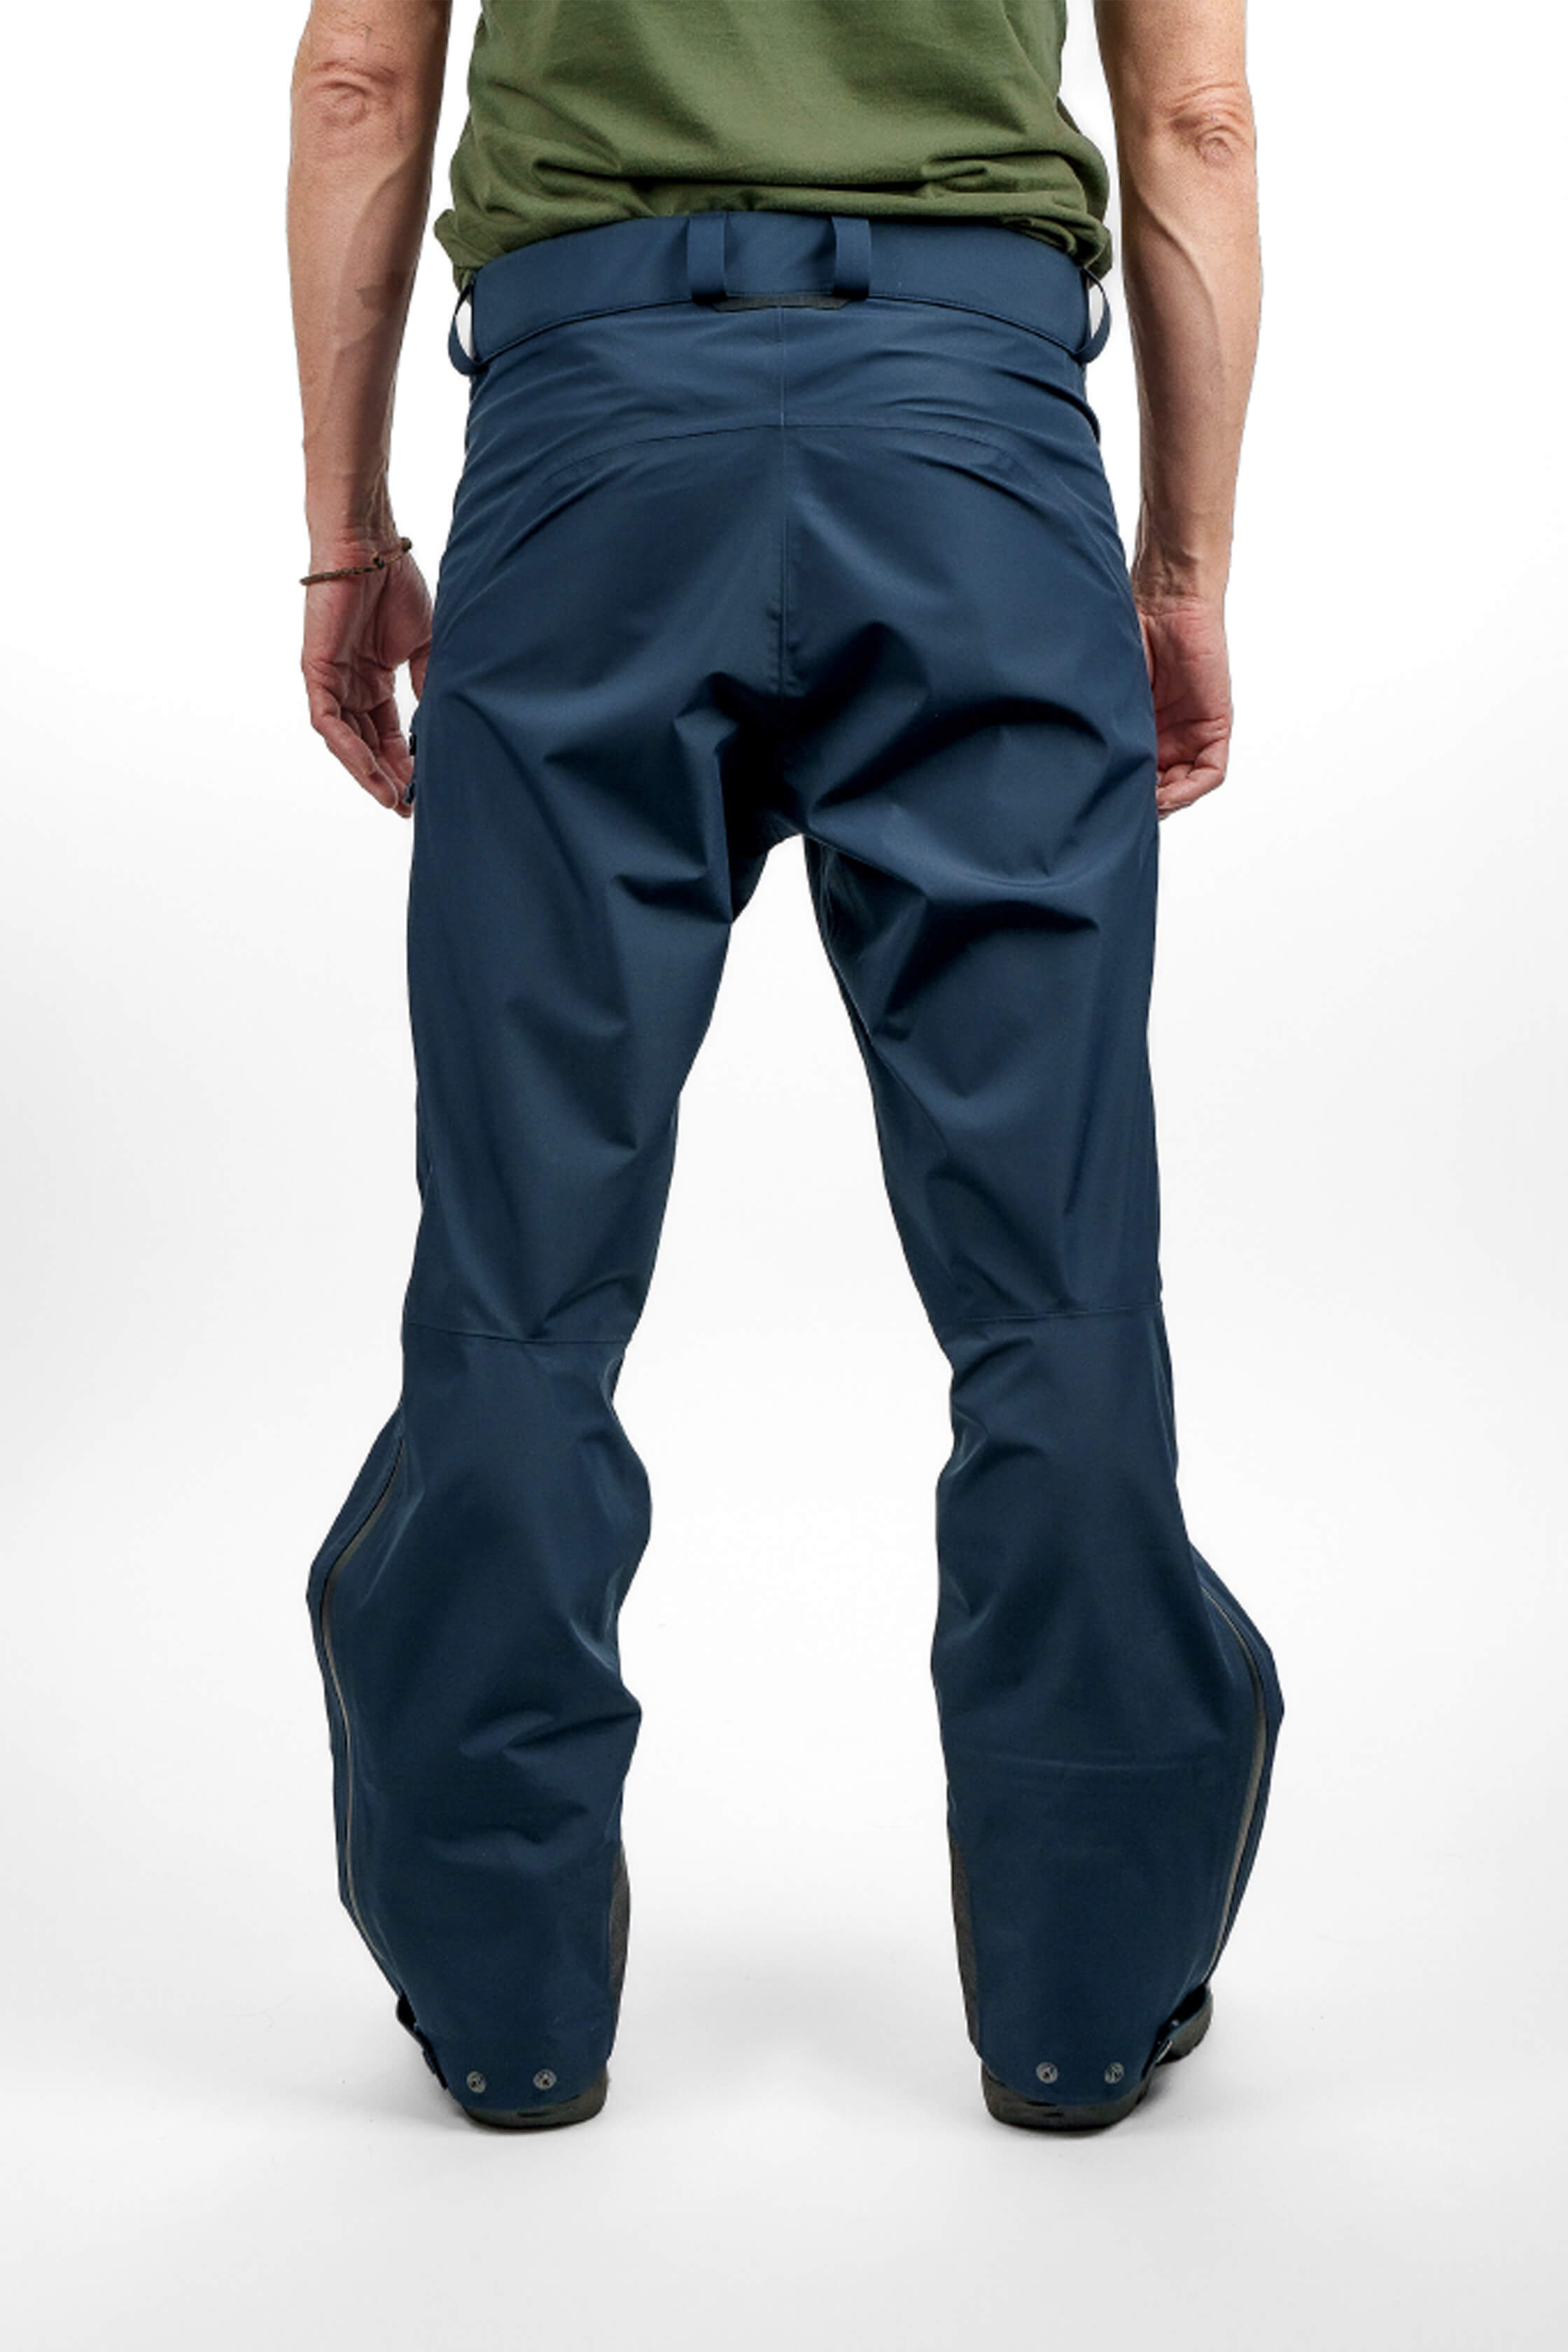 Blue hardshell pants in unisex sizing - back view of the Arctic Legacy Nuka Elements 3 layer Pants#color_total-eclipse